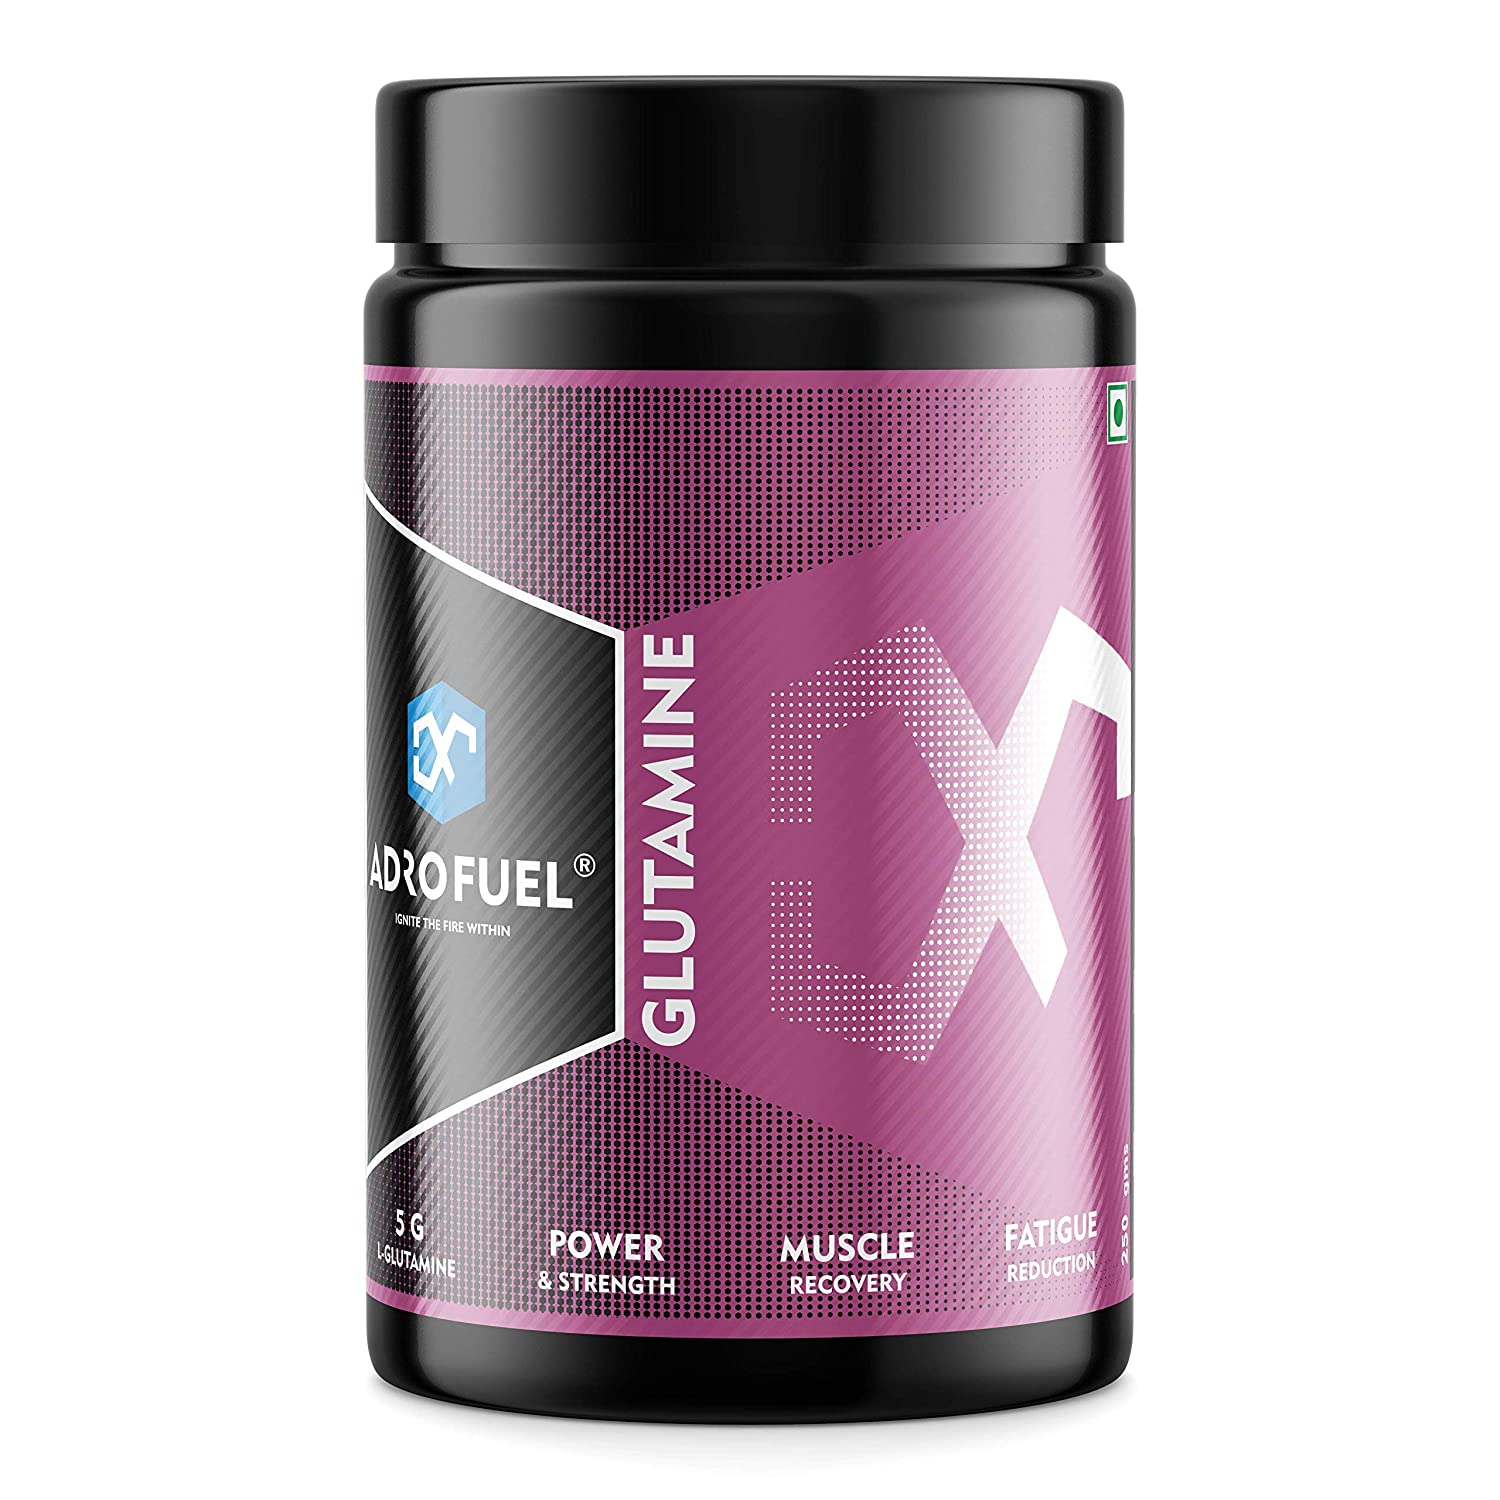 Adrofuel Glutamine For Post Workout Image